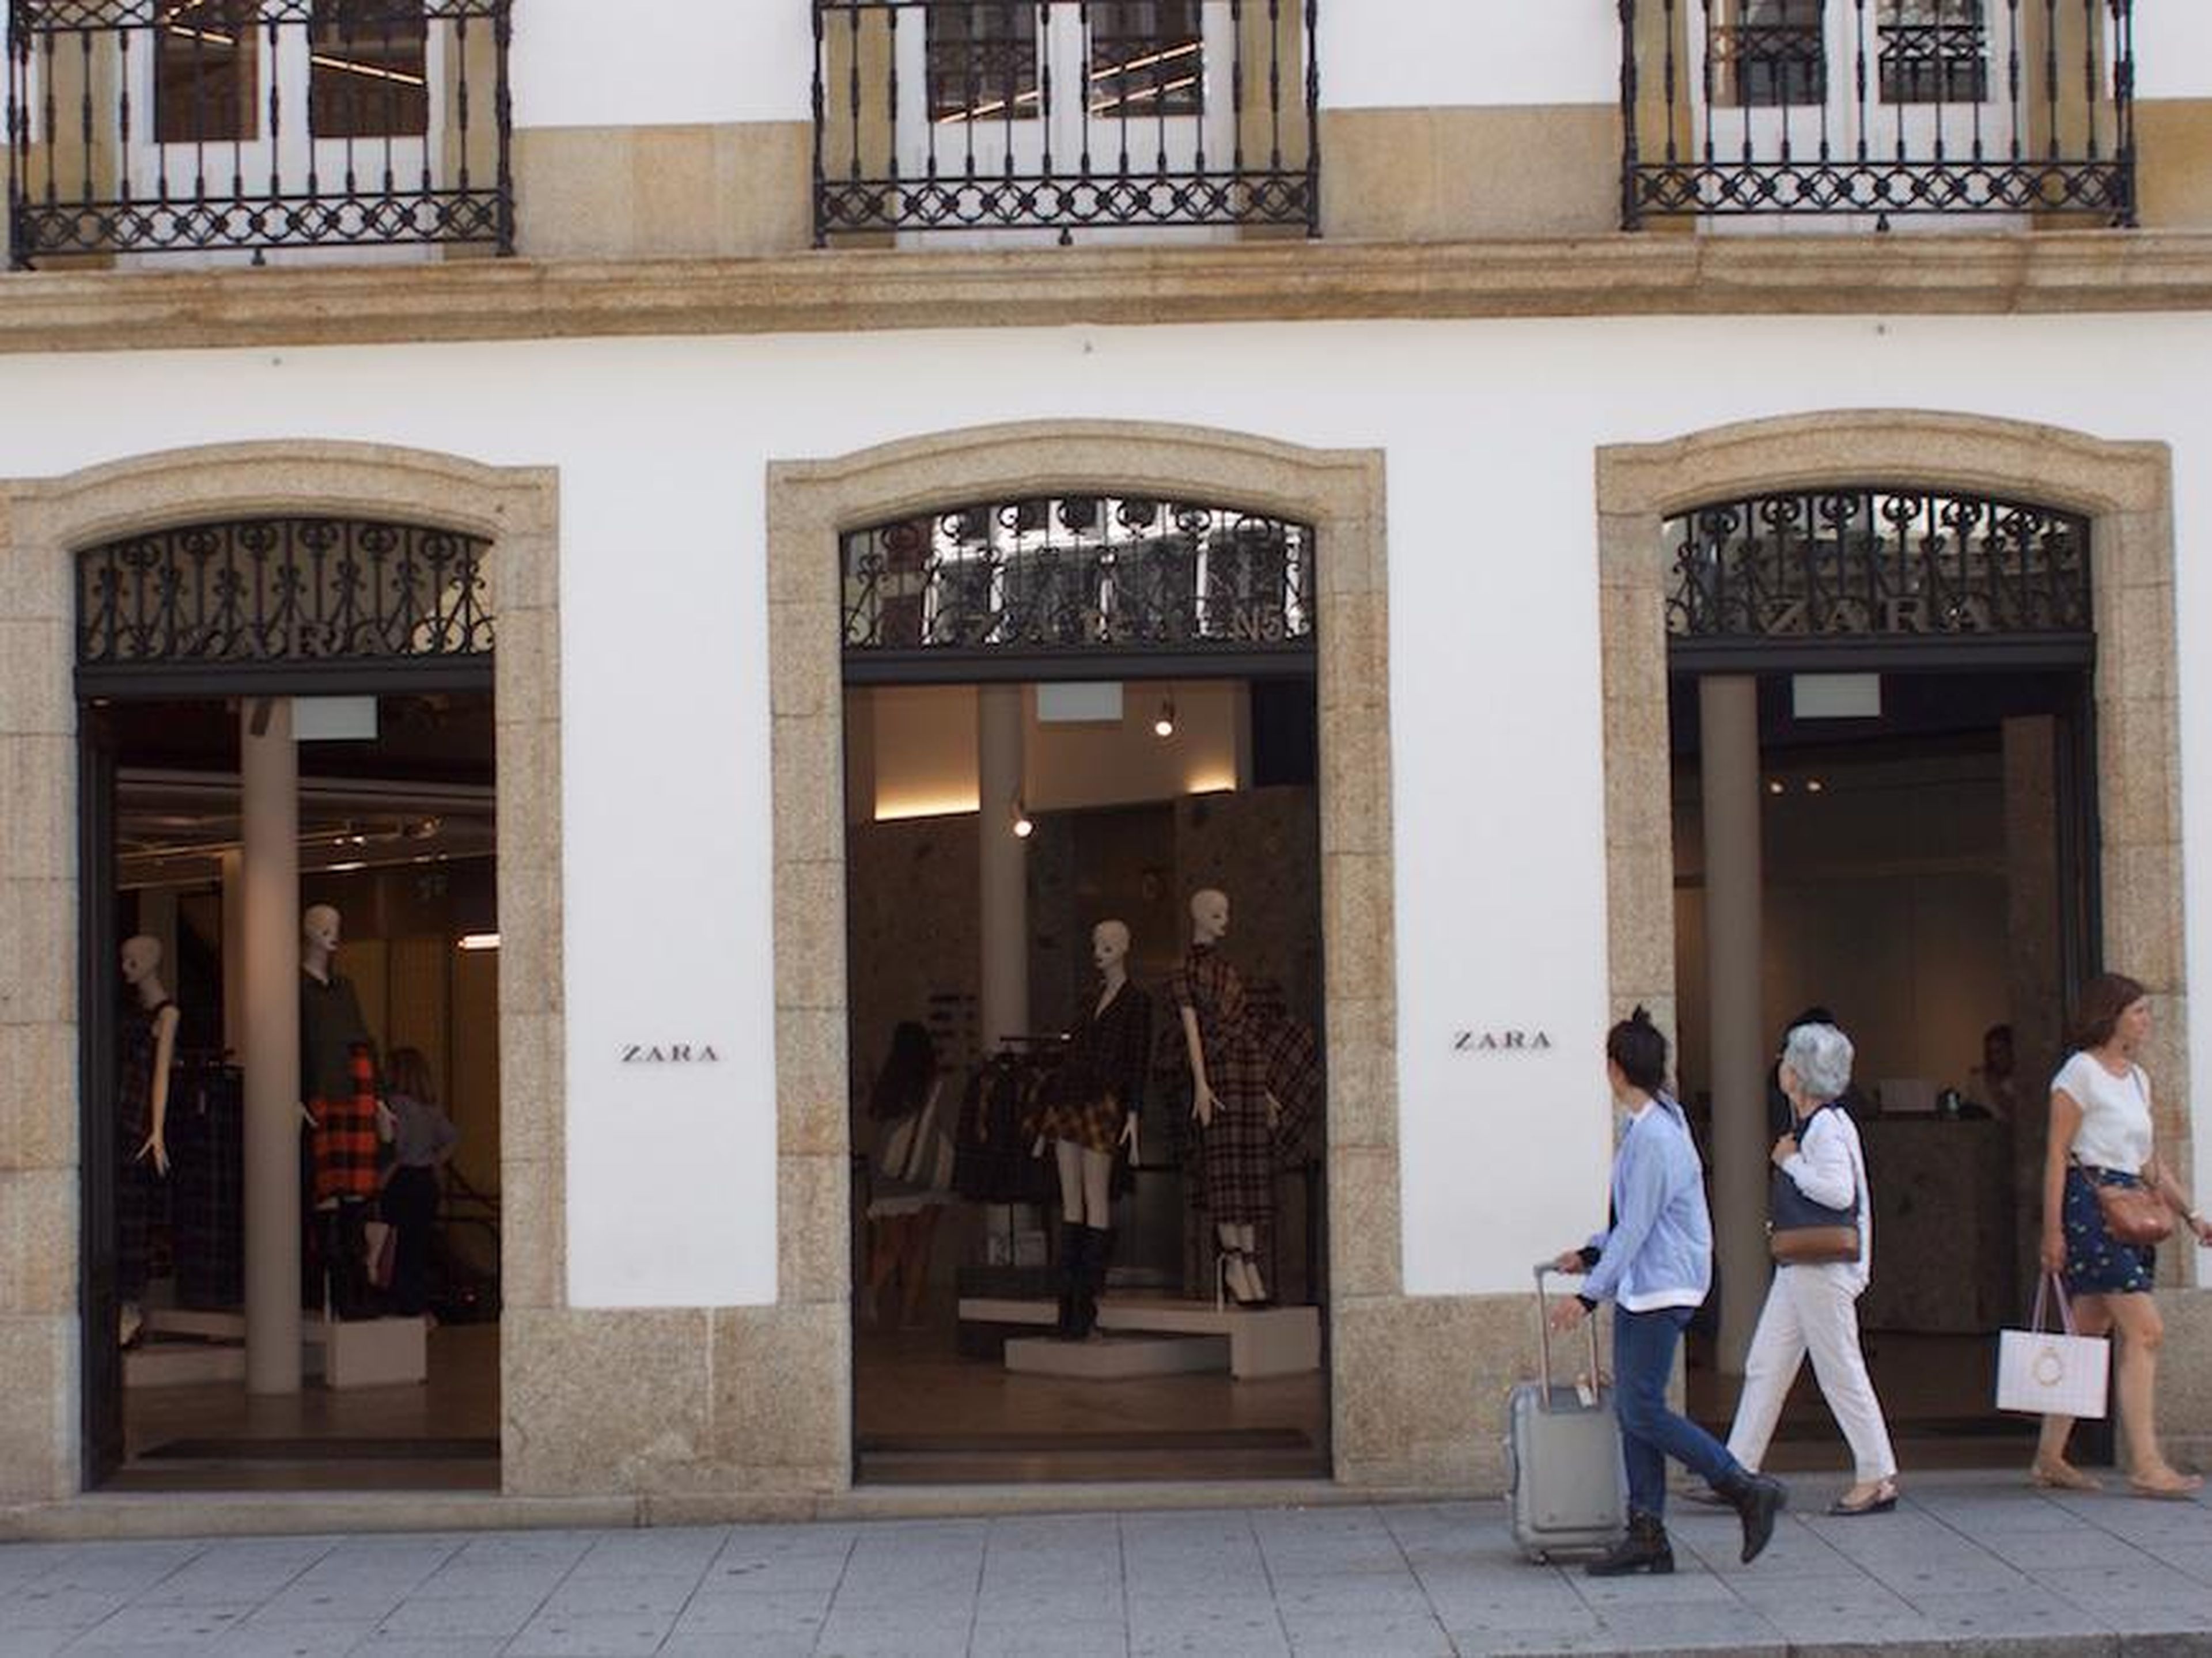 "Inditex is the big company that moves everything here," Adolfo Lopez, 58, a business owner who has lived in the city all his life, told Business Insider.